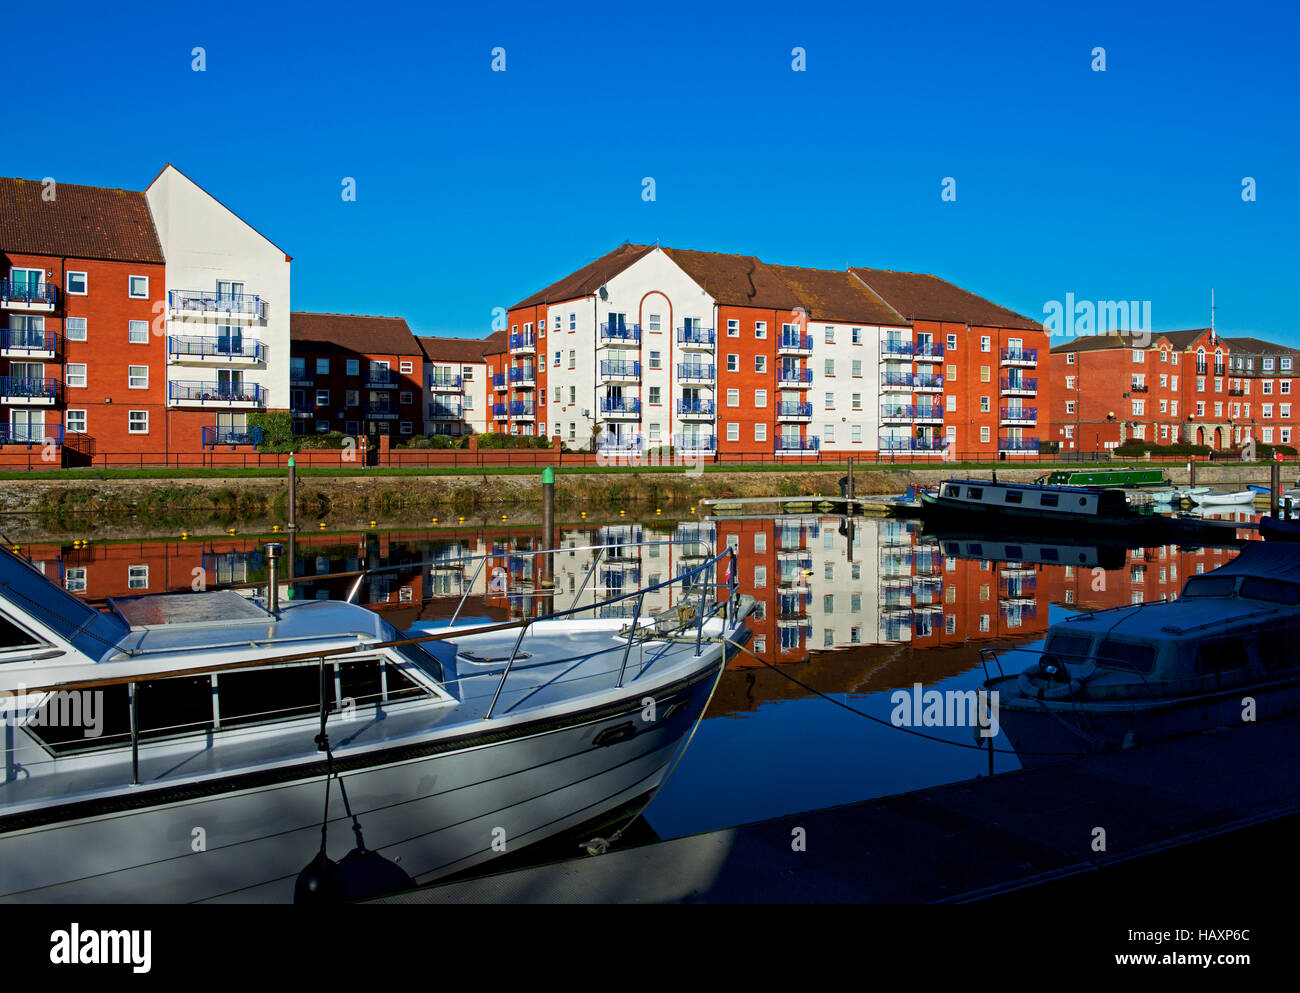 Apartments overlooking the canal basin of the Bridgwater and Taunton Canal, Bridgwater, Somerset, England UK Stock Photo